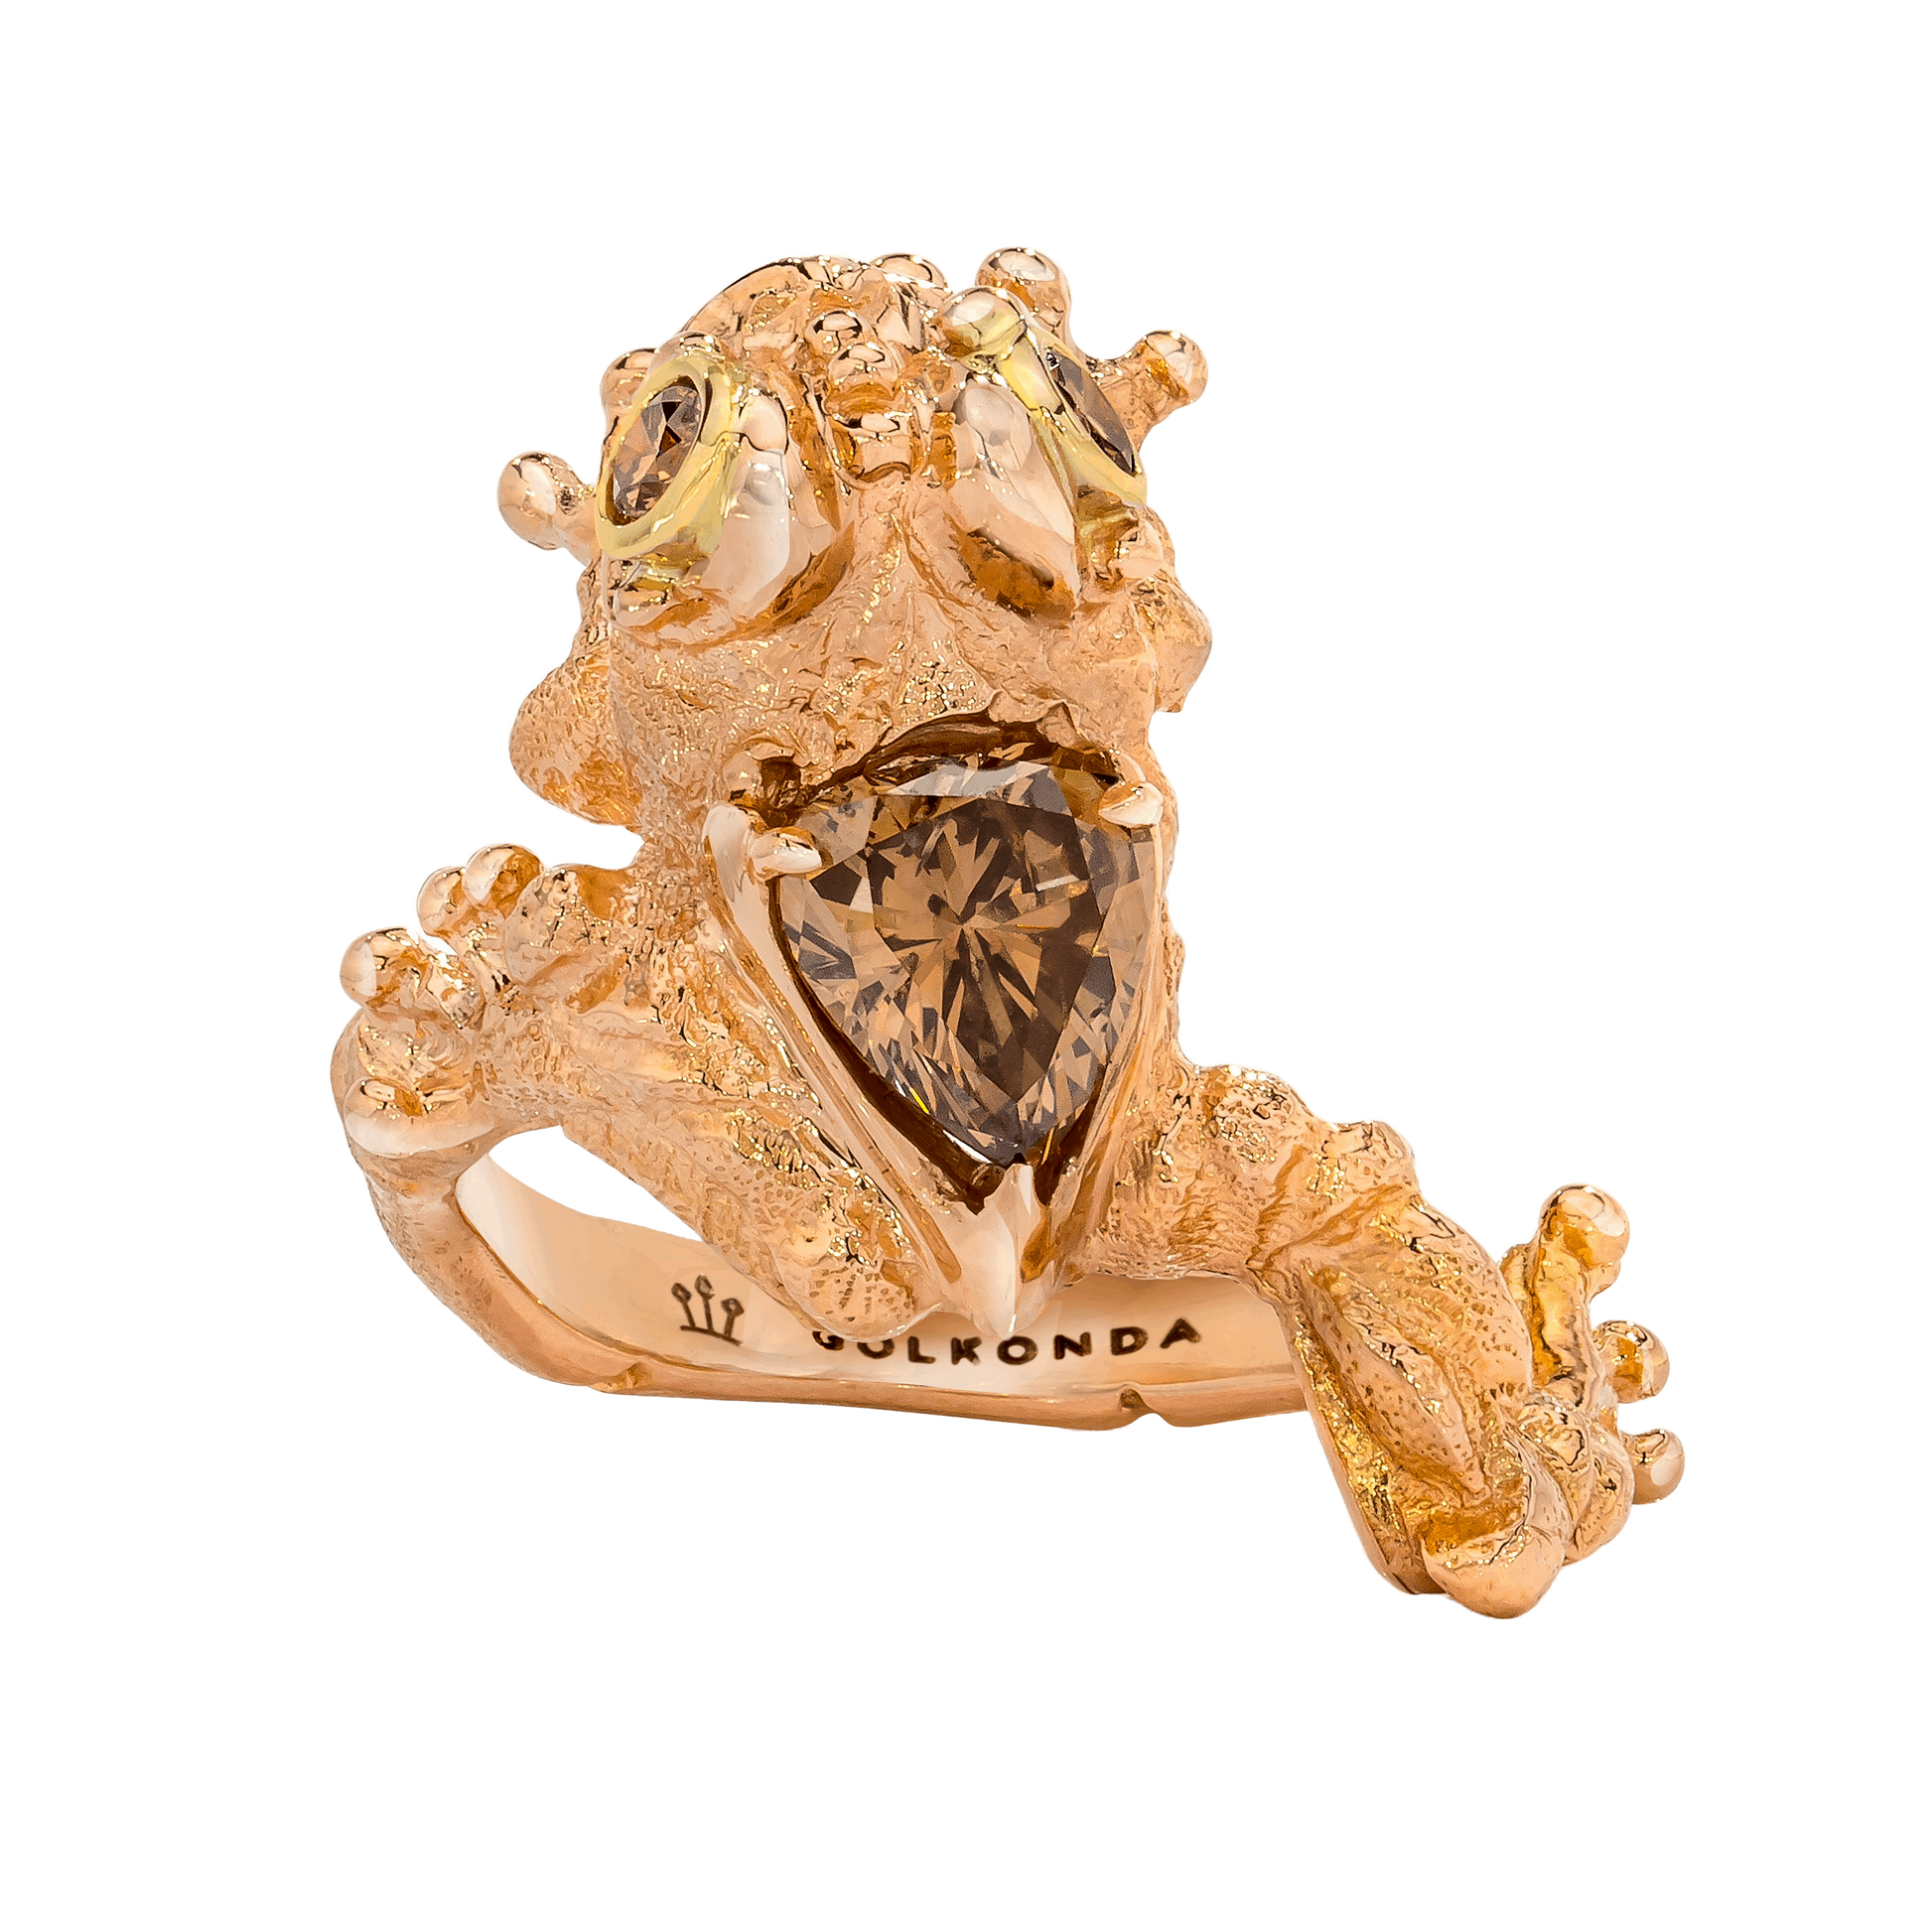 FROG RING, 1.25 CTTW, 1.05 CT CINAMMON COLORED PEAR SHAPE DIAMOND, 18K ROSE GOLD